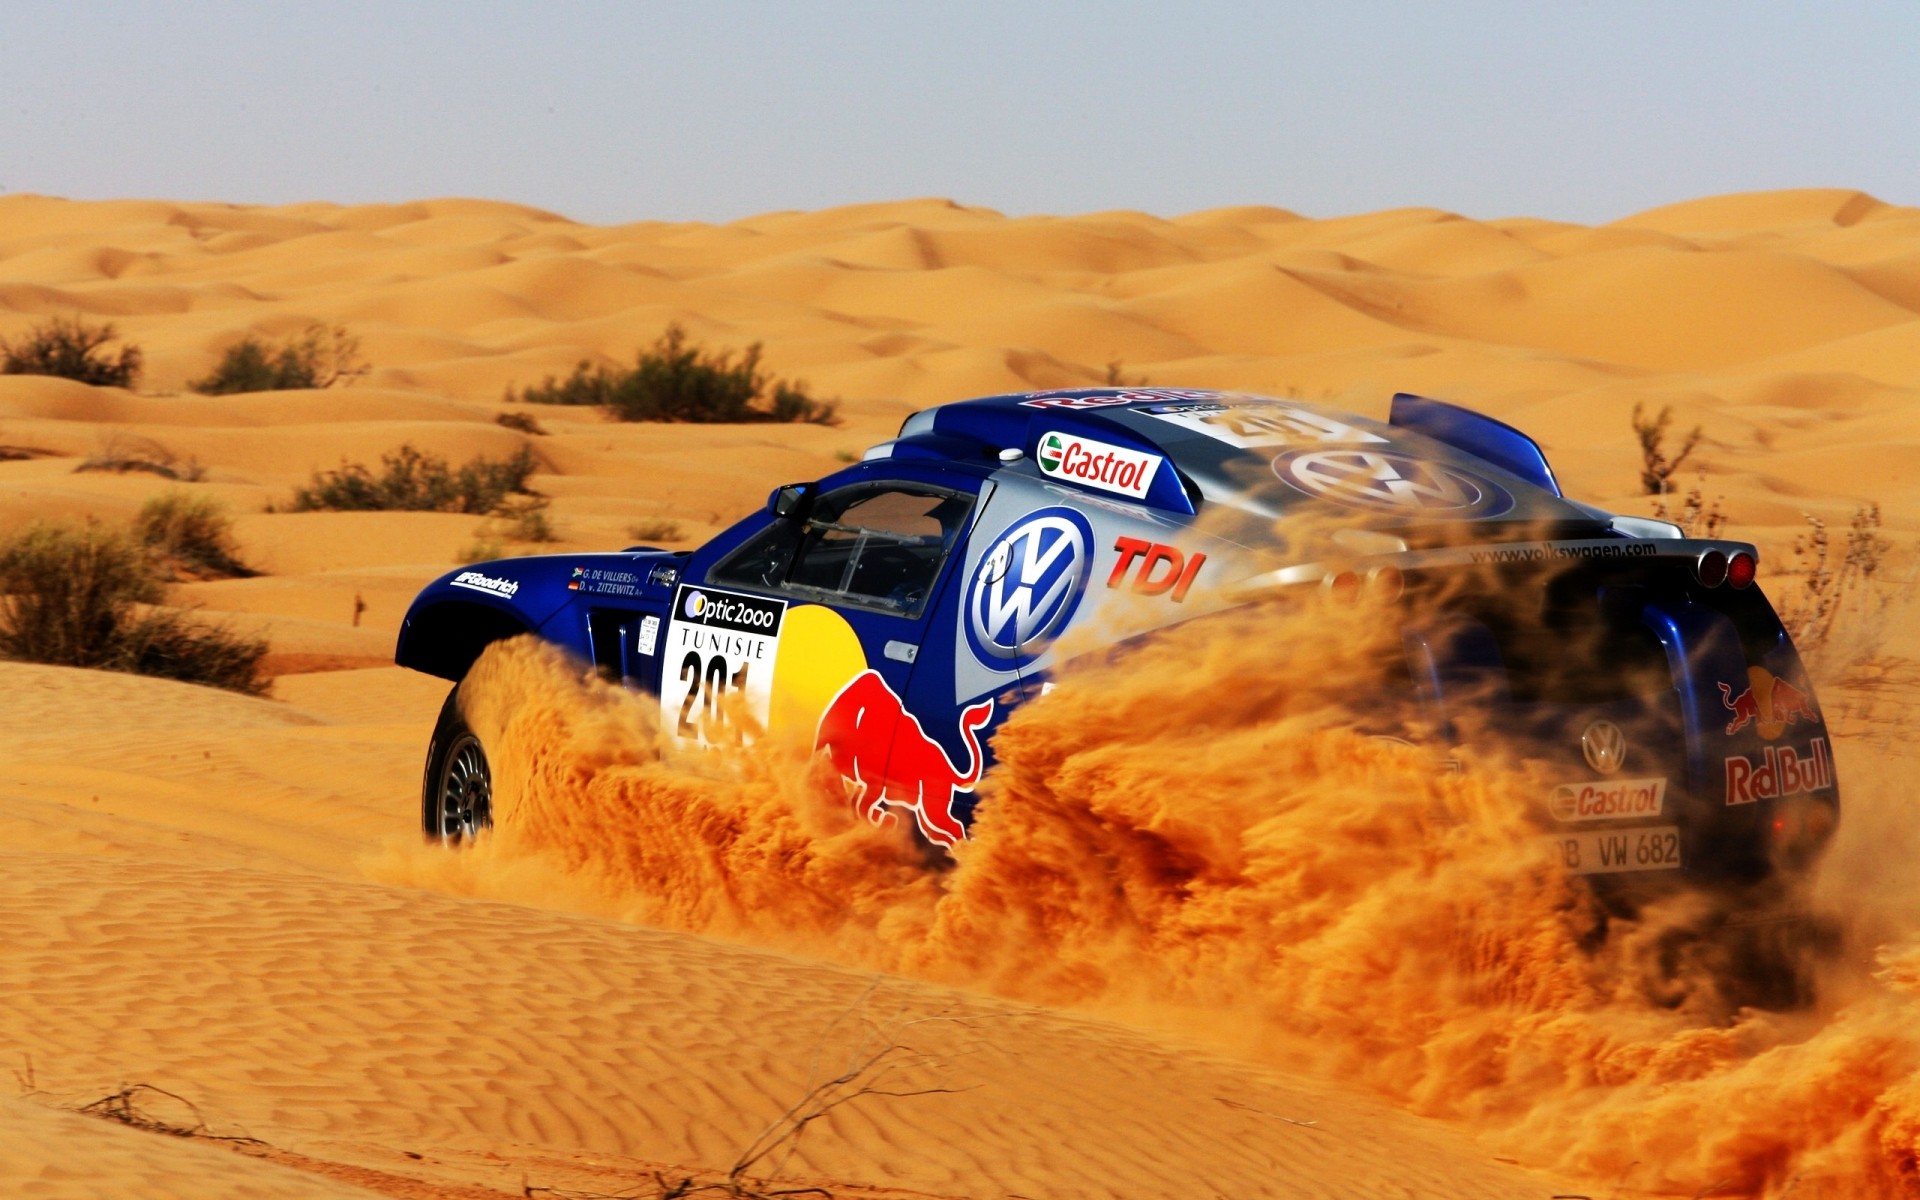 sports vehicle competition sand race adventure action desert hurry fast track transportation system rally cars image